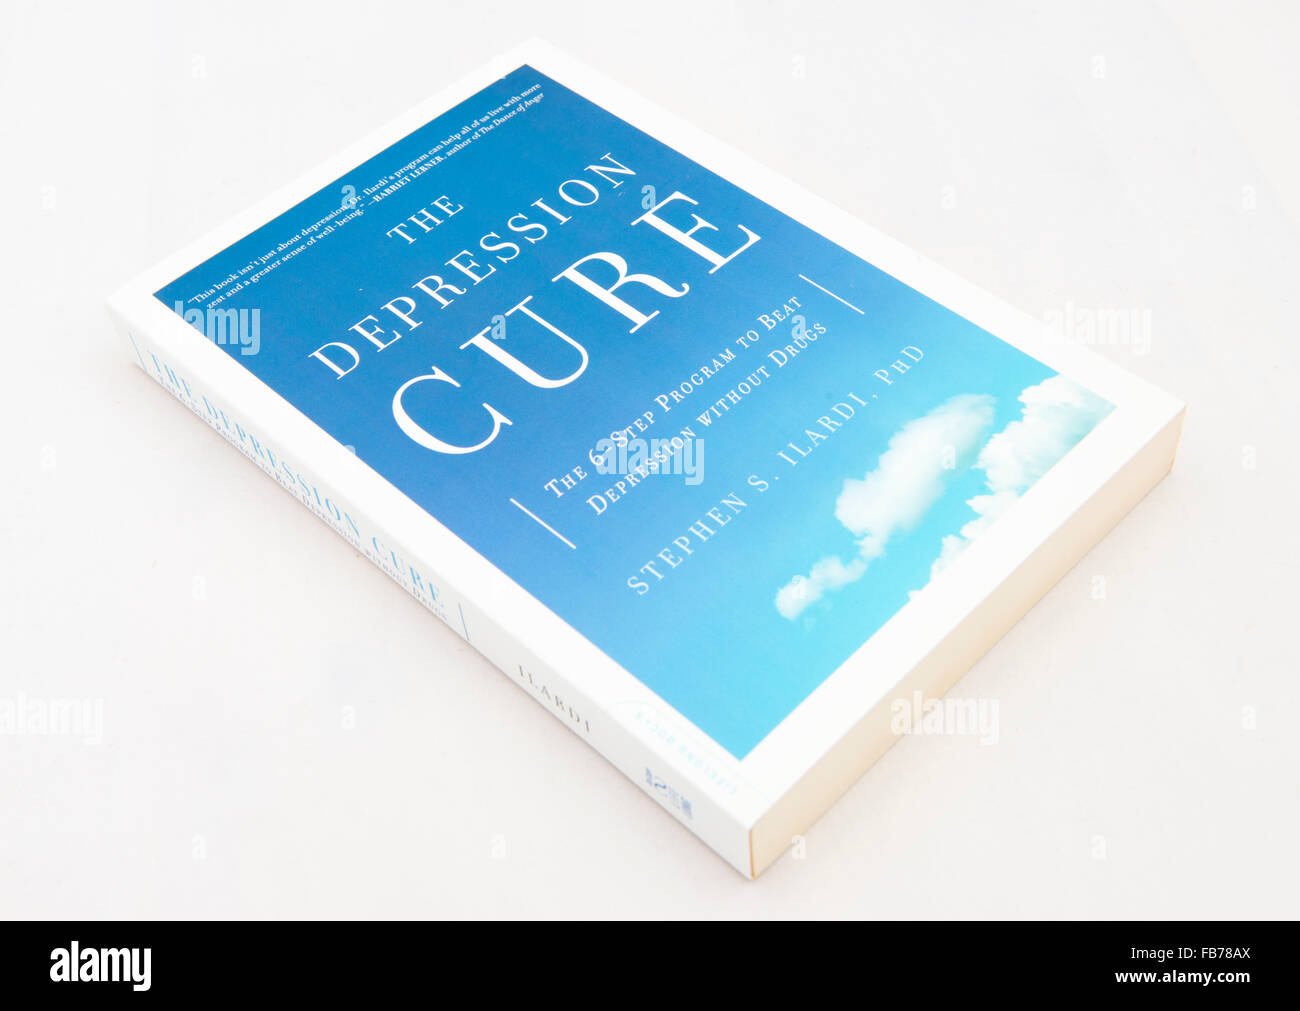 The Depression Cure: The 6 step program to beat depression without drugs by Stephen S. Ilardi. Stock Photo